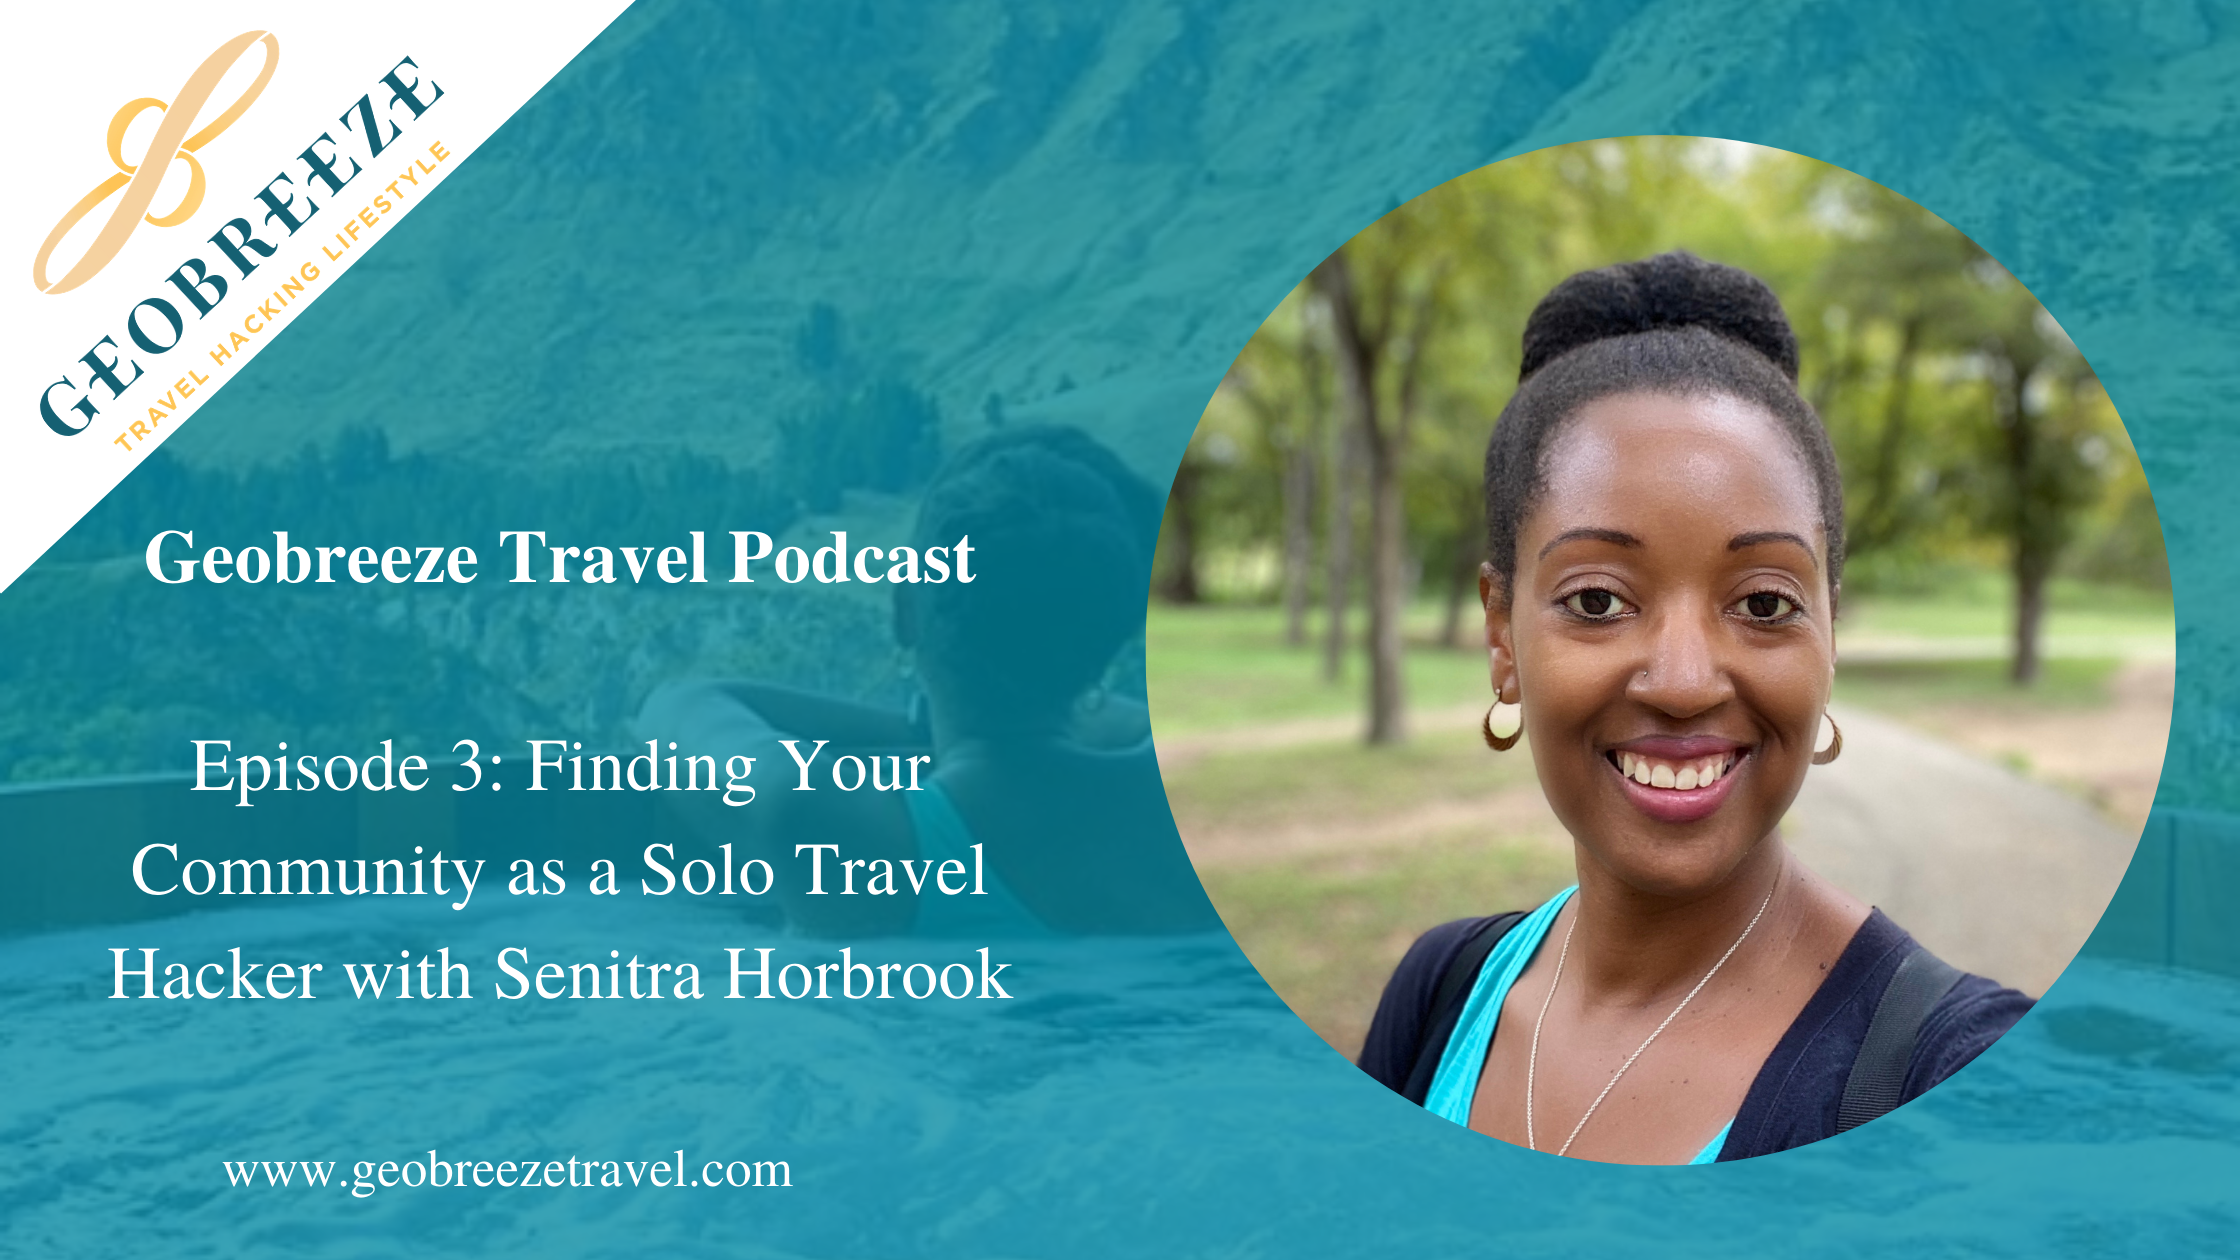 Episode 3: Finding Your Community as a Solo Travel Hacker with Senitra Horbrook